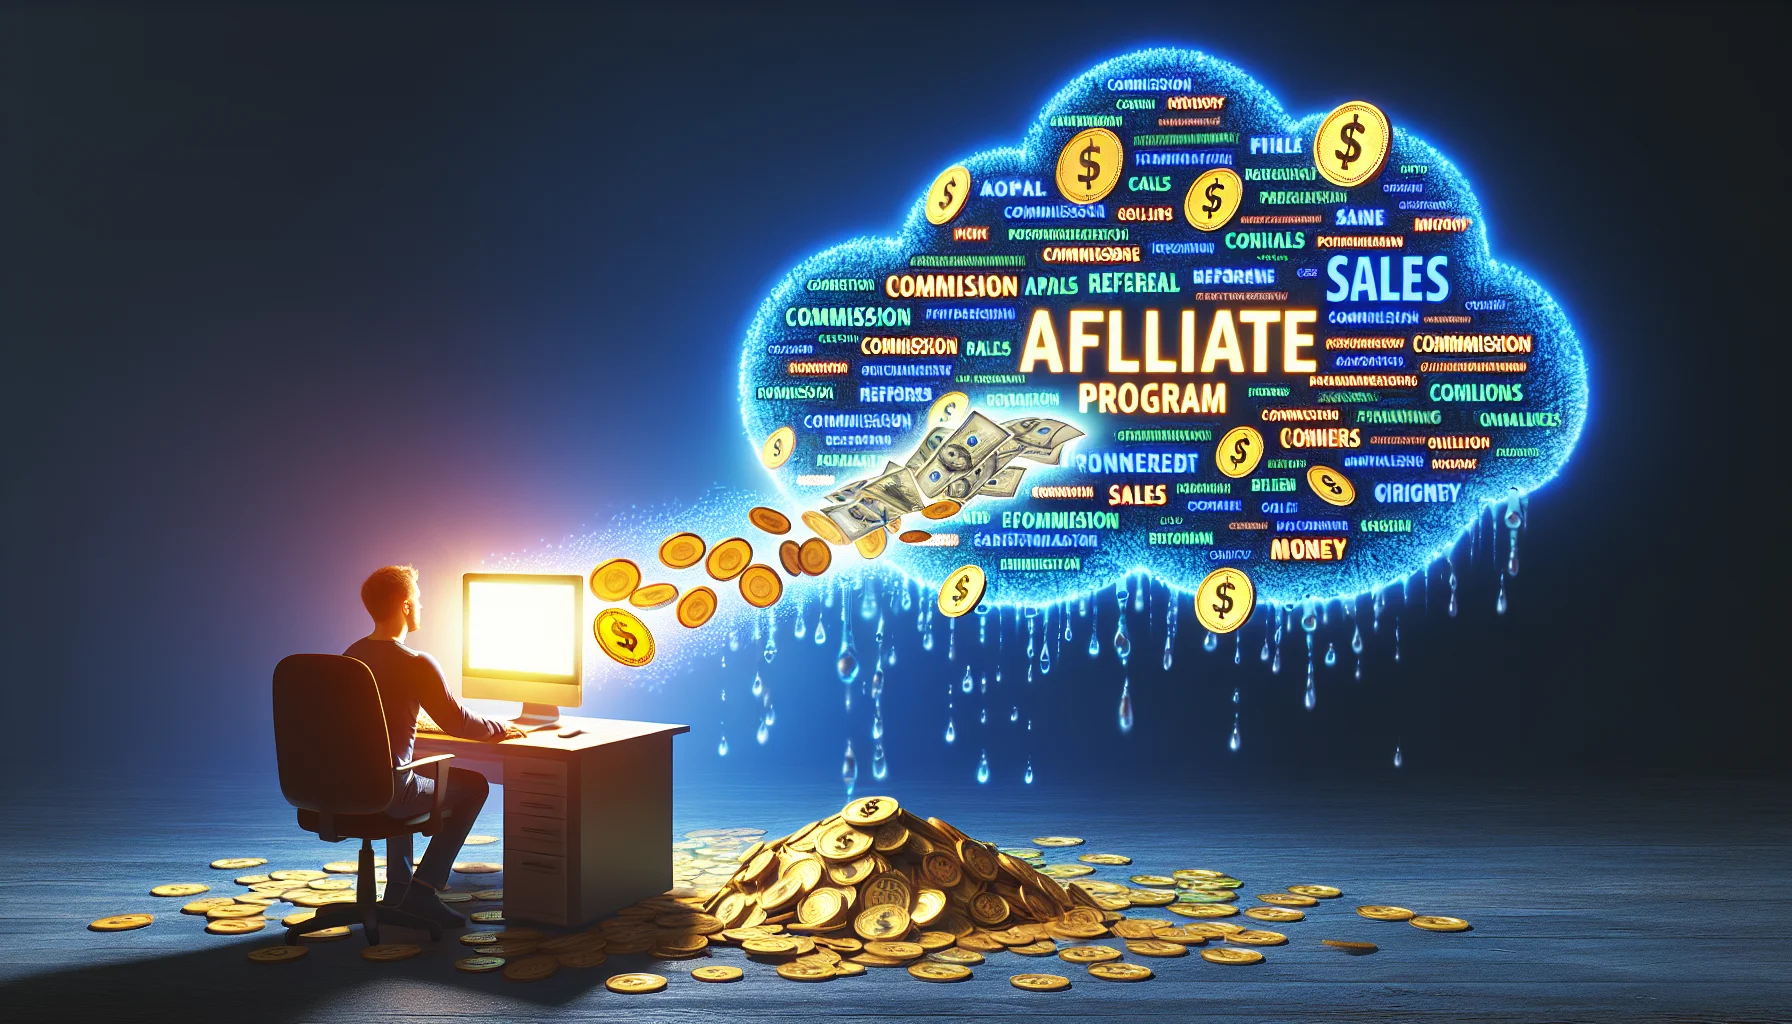 Create a humorous and realistic image displaying an affiliate program that could be linked to a generic online printing service. Set the scene in a digital world where data and ideas flow like a river of money. Picture a user sitting in front of their computer, their face illuminated by the screen's glow, as digital coins pour out from the screen. Around them, a cloud made up of words related to affiliate marketing like 'commission', 'referral', 'sales' and 'money' conveys the potential for earning online.